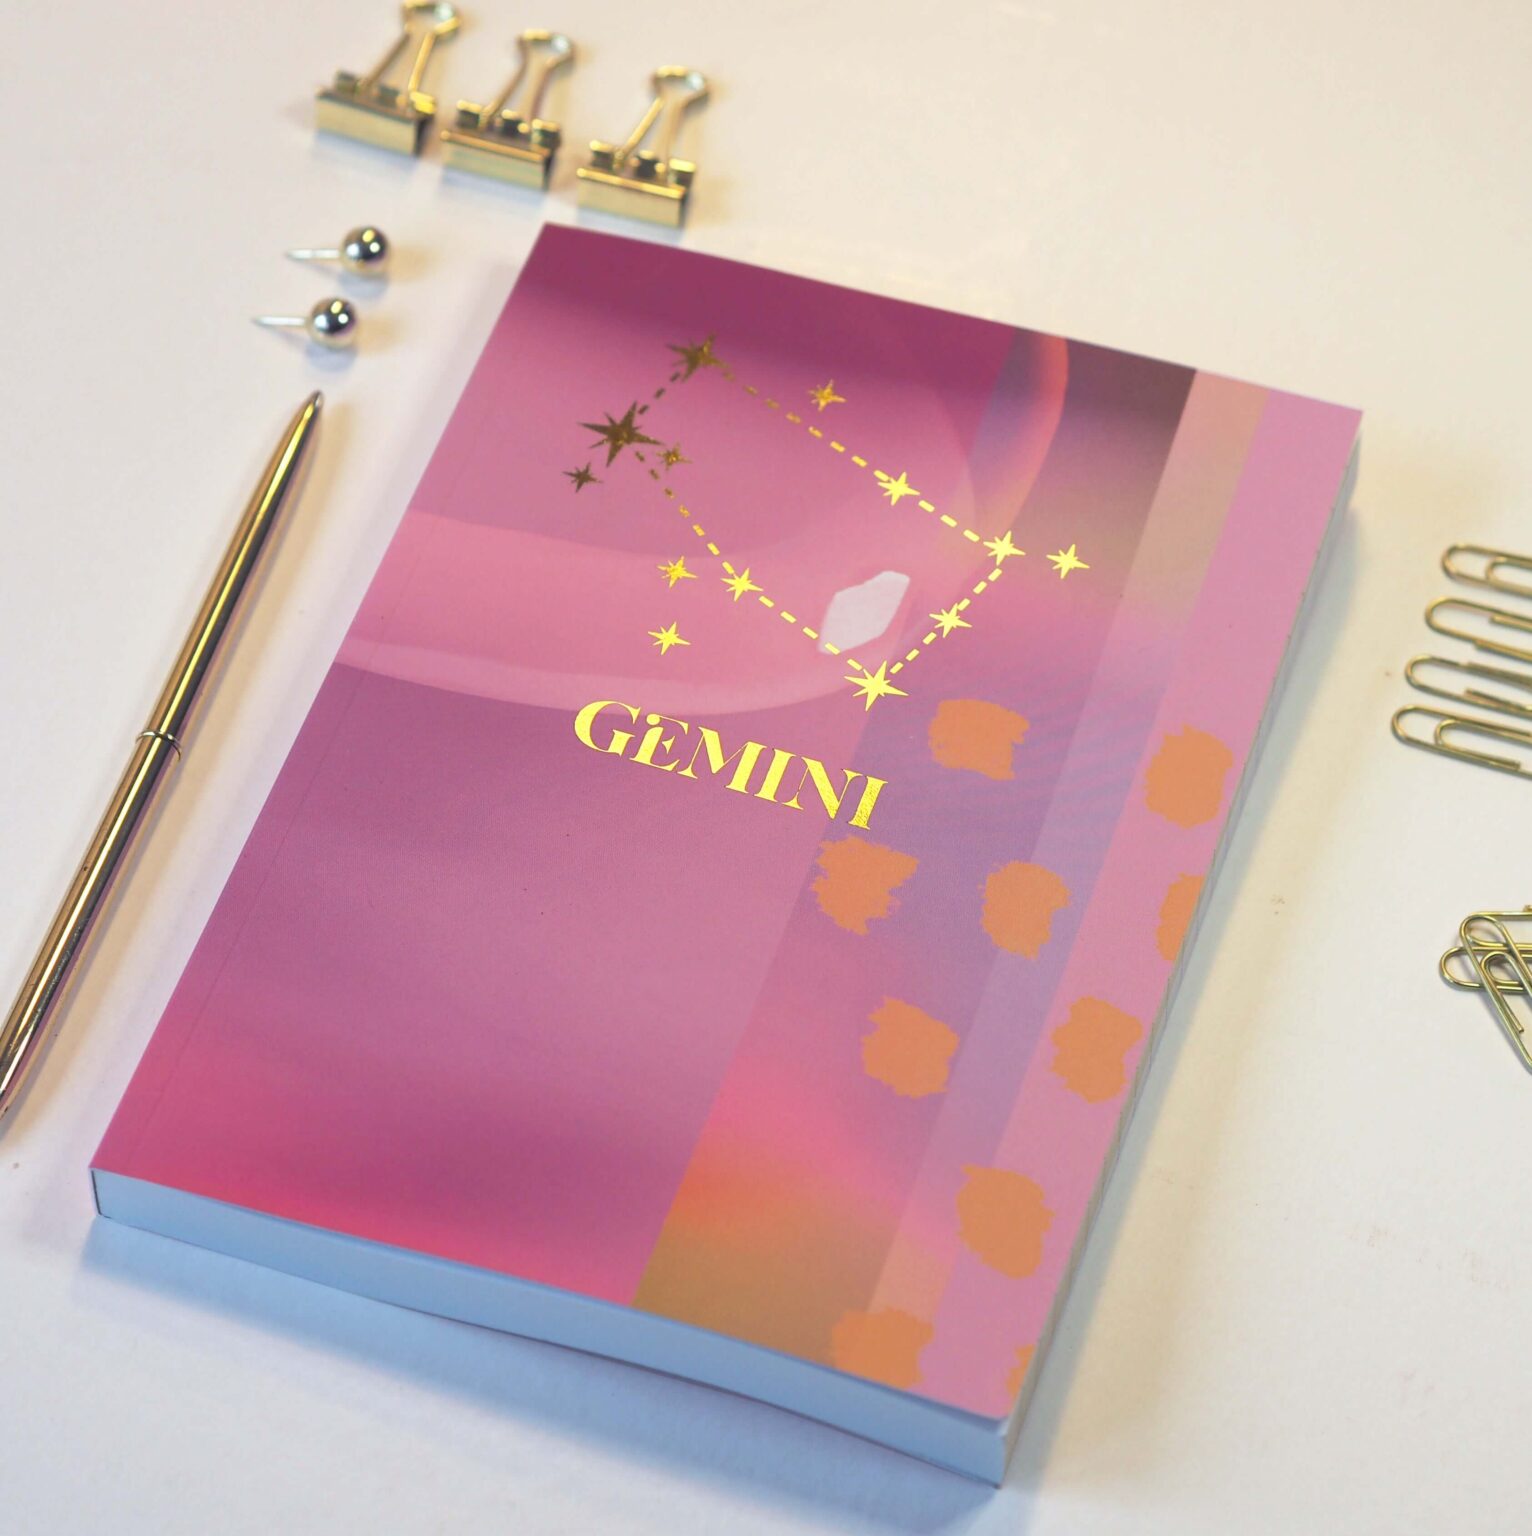 gemini zodiac notebook, lined journal style pages, gold foil star detail